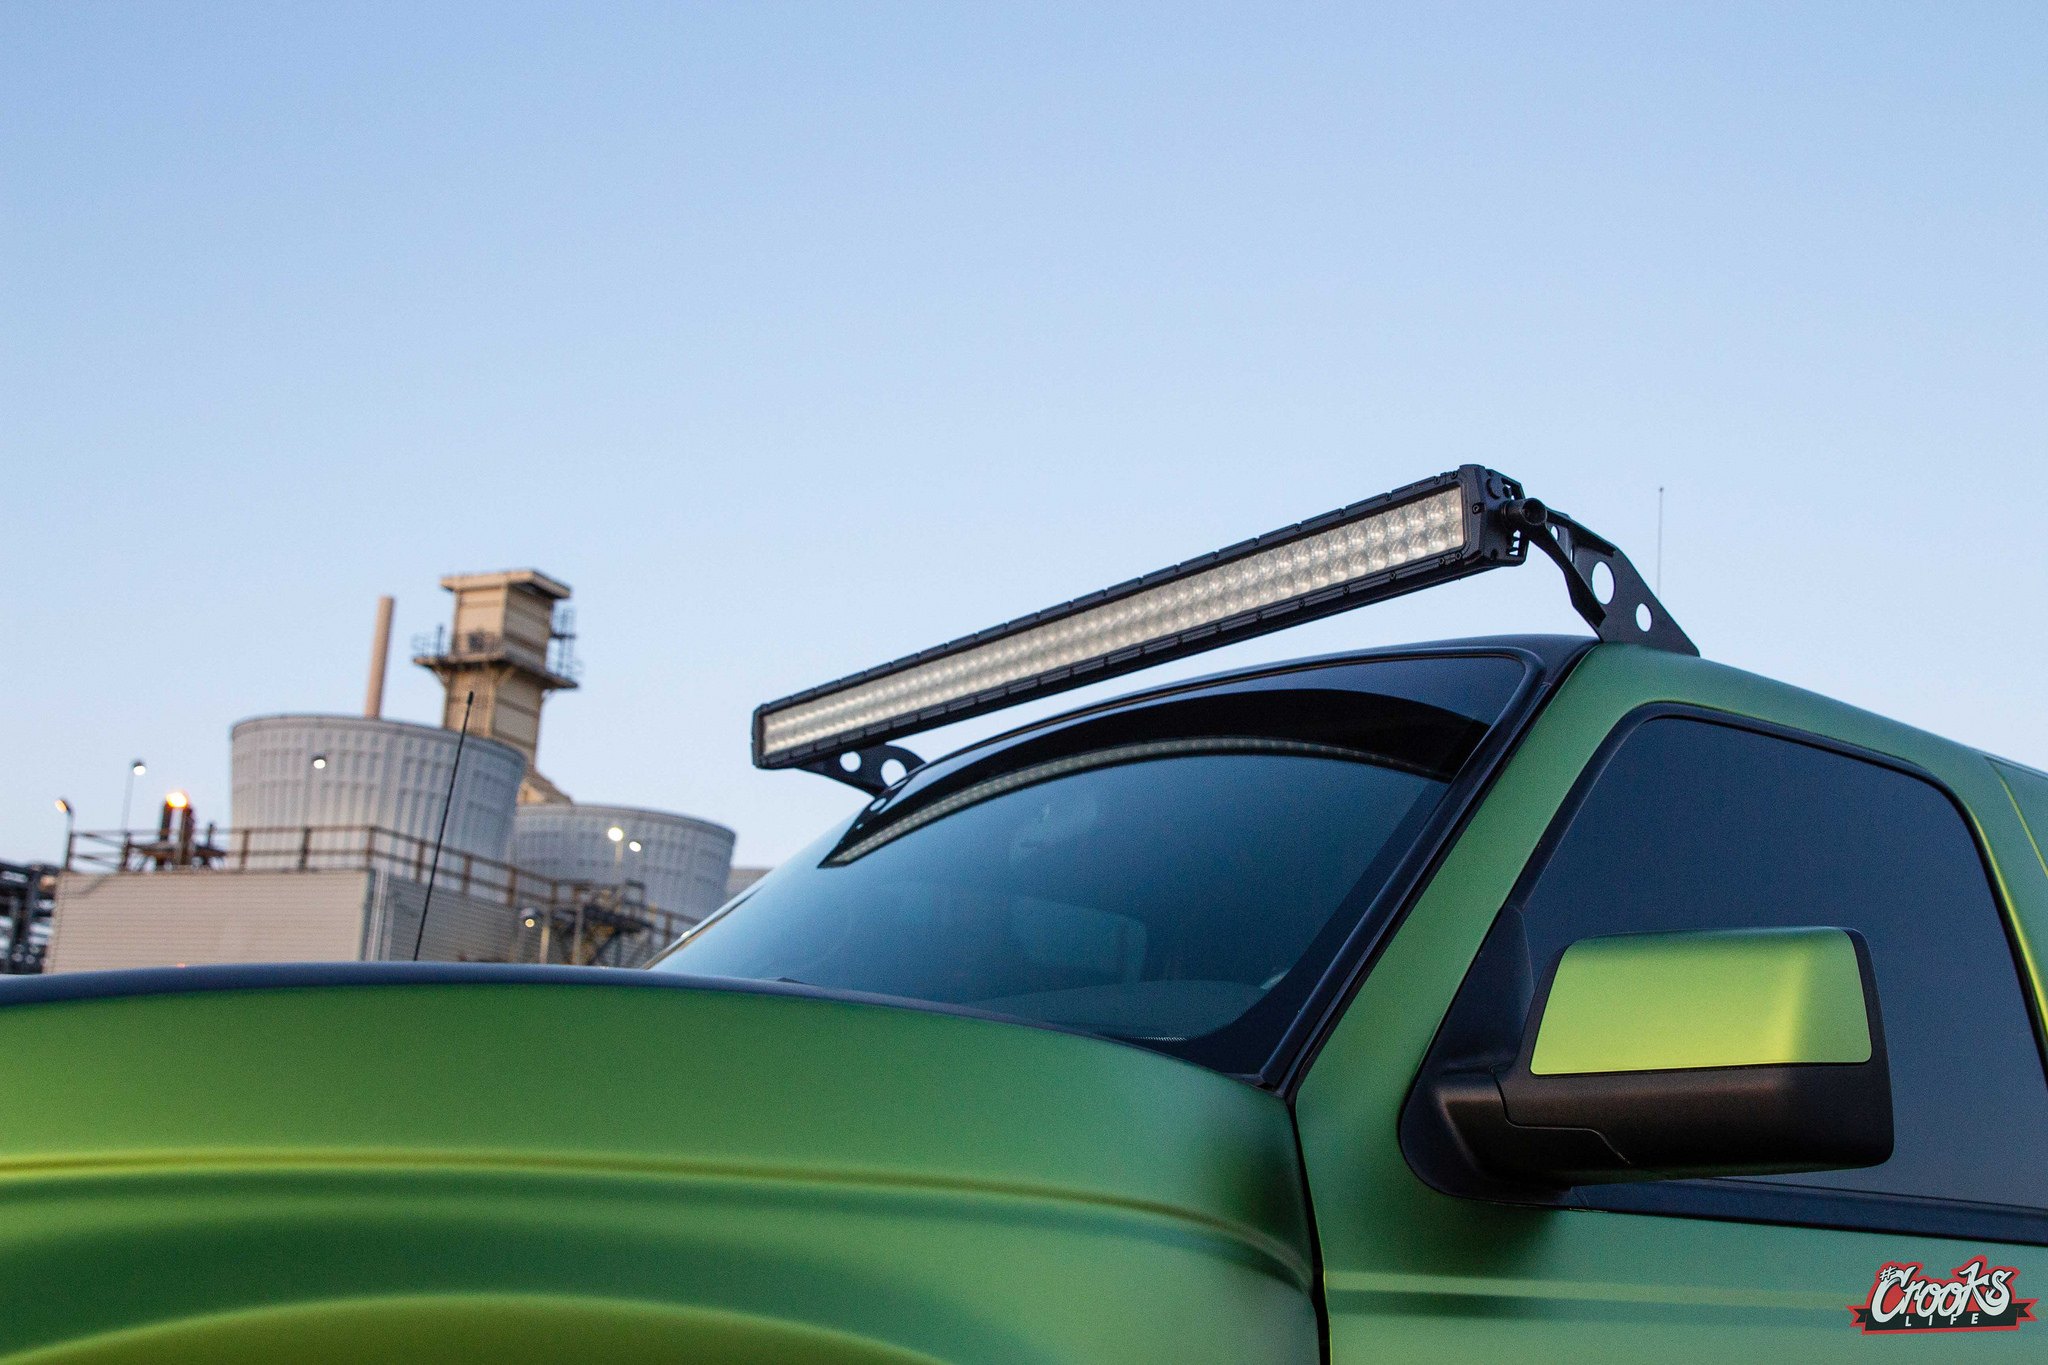 Metallic Green Ford Ranger with Custom Side Mirrors - Photo by Jimmy Crook